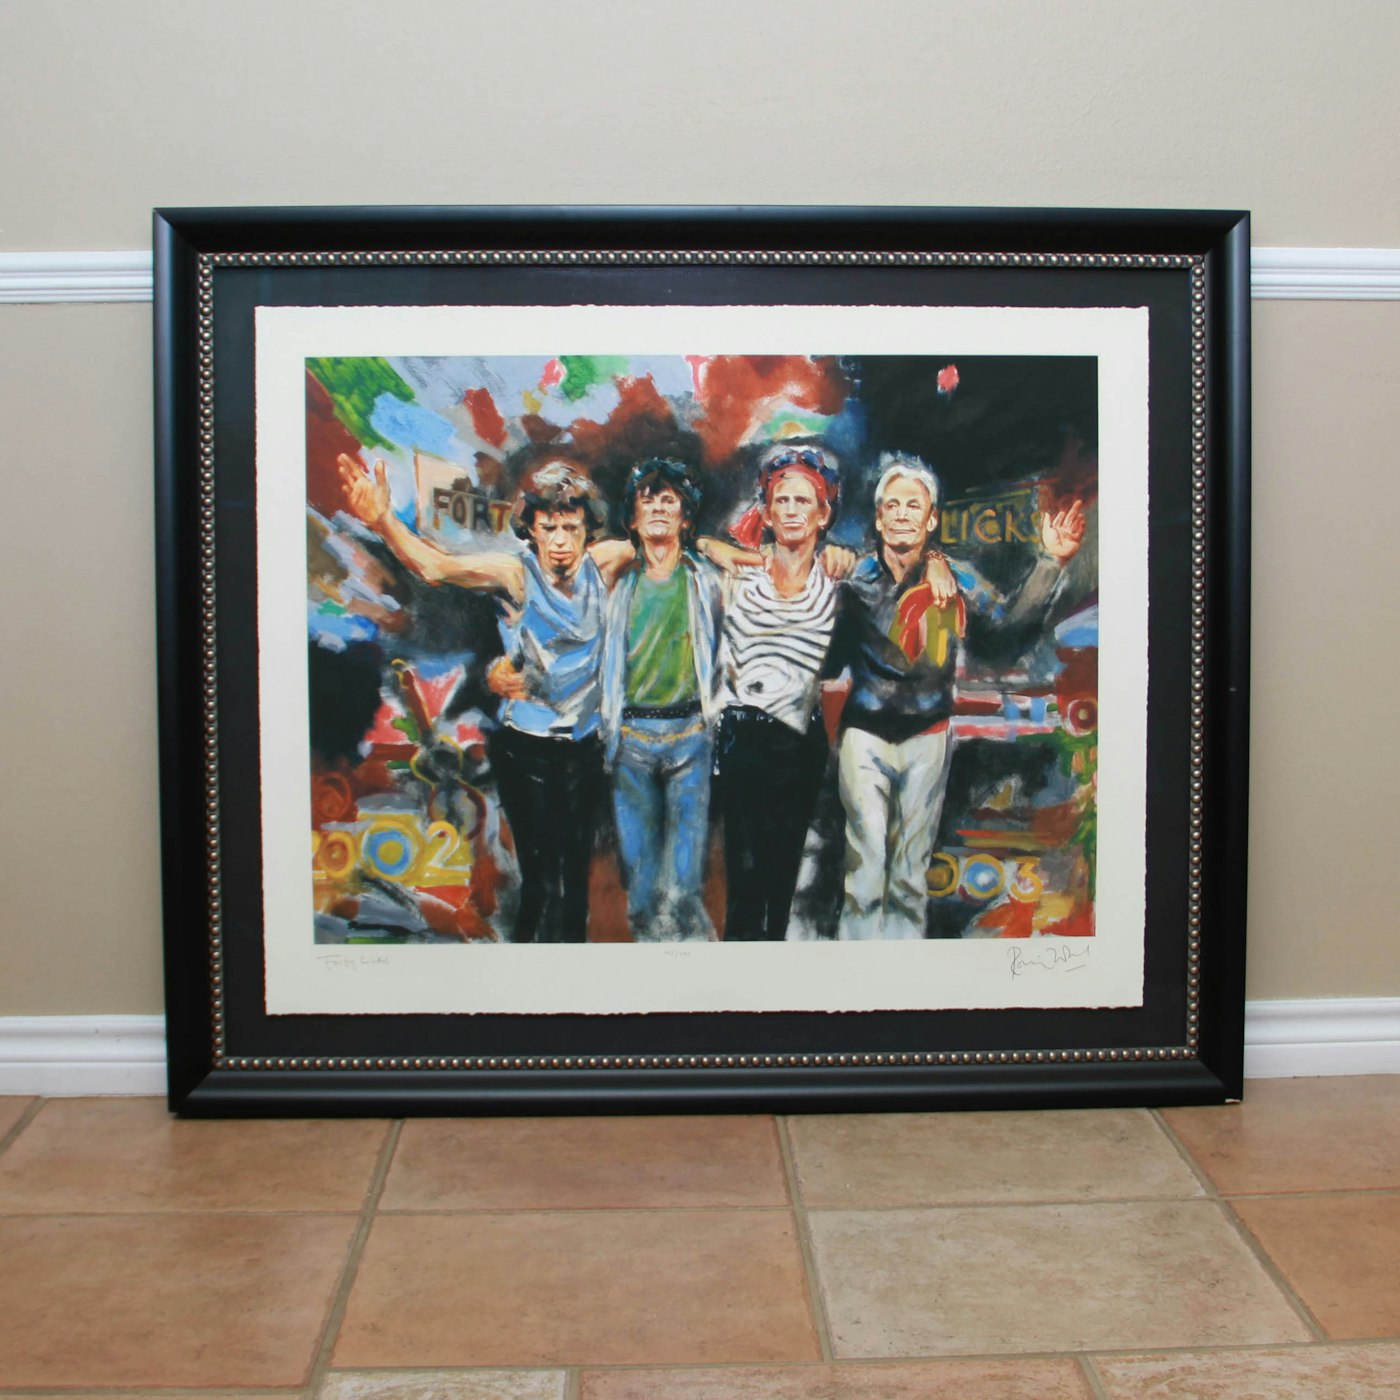 Signed Ronnie Wood Limited Edition Print Titled "Forty 